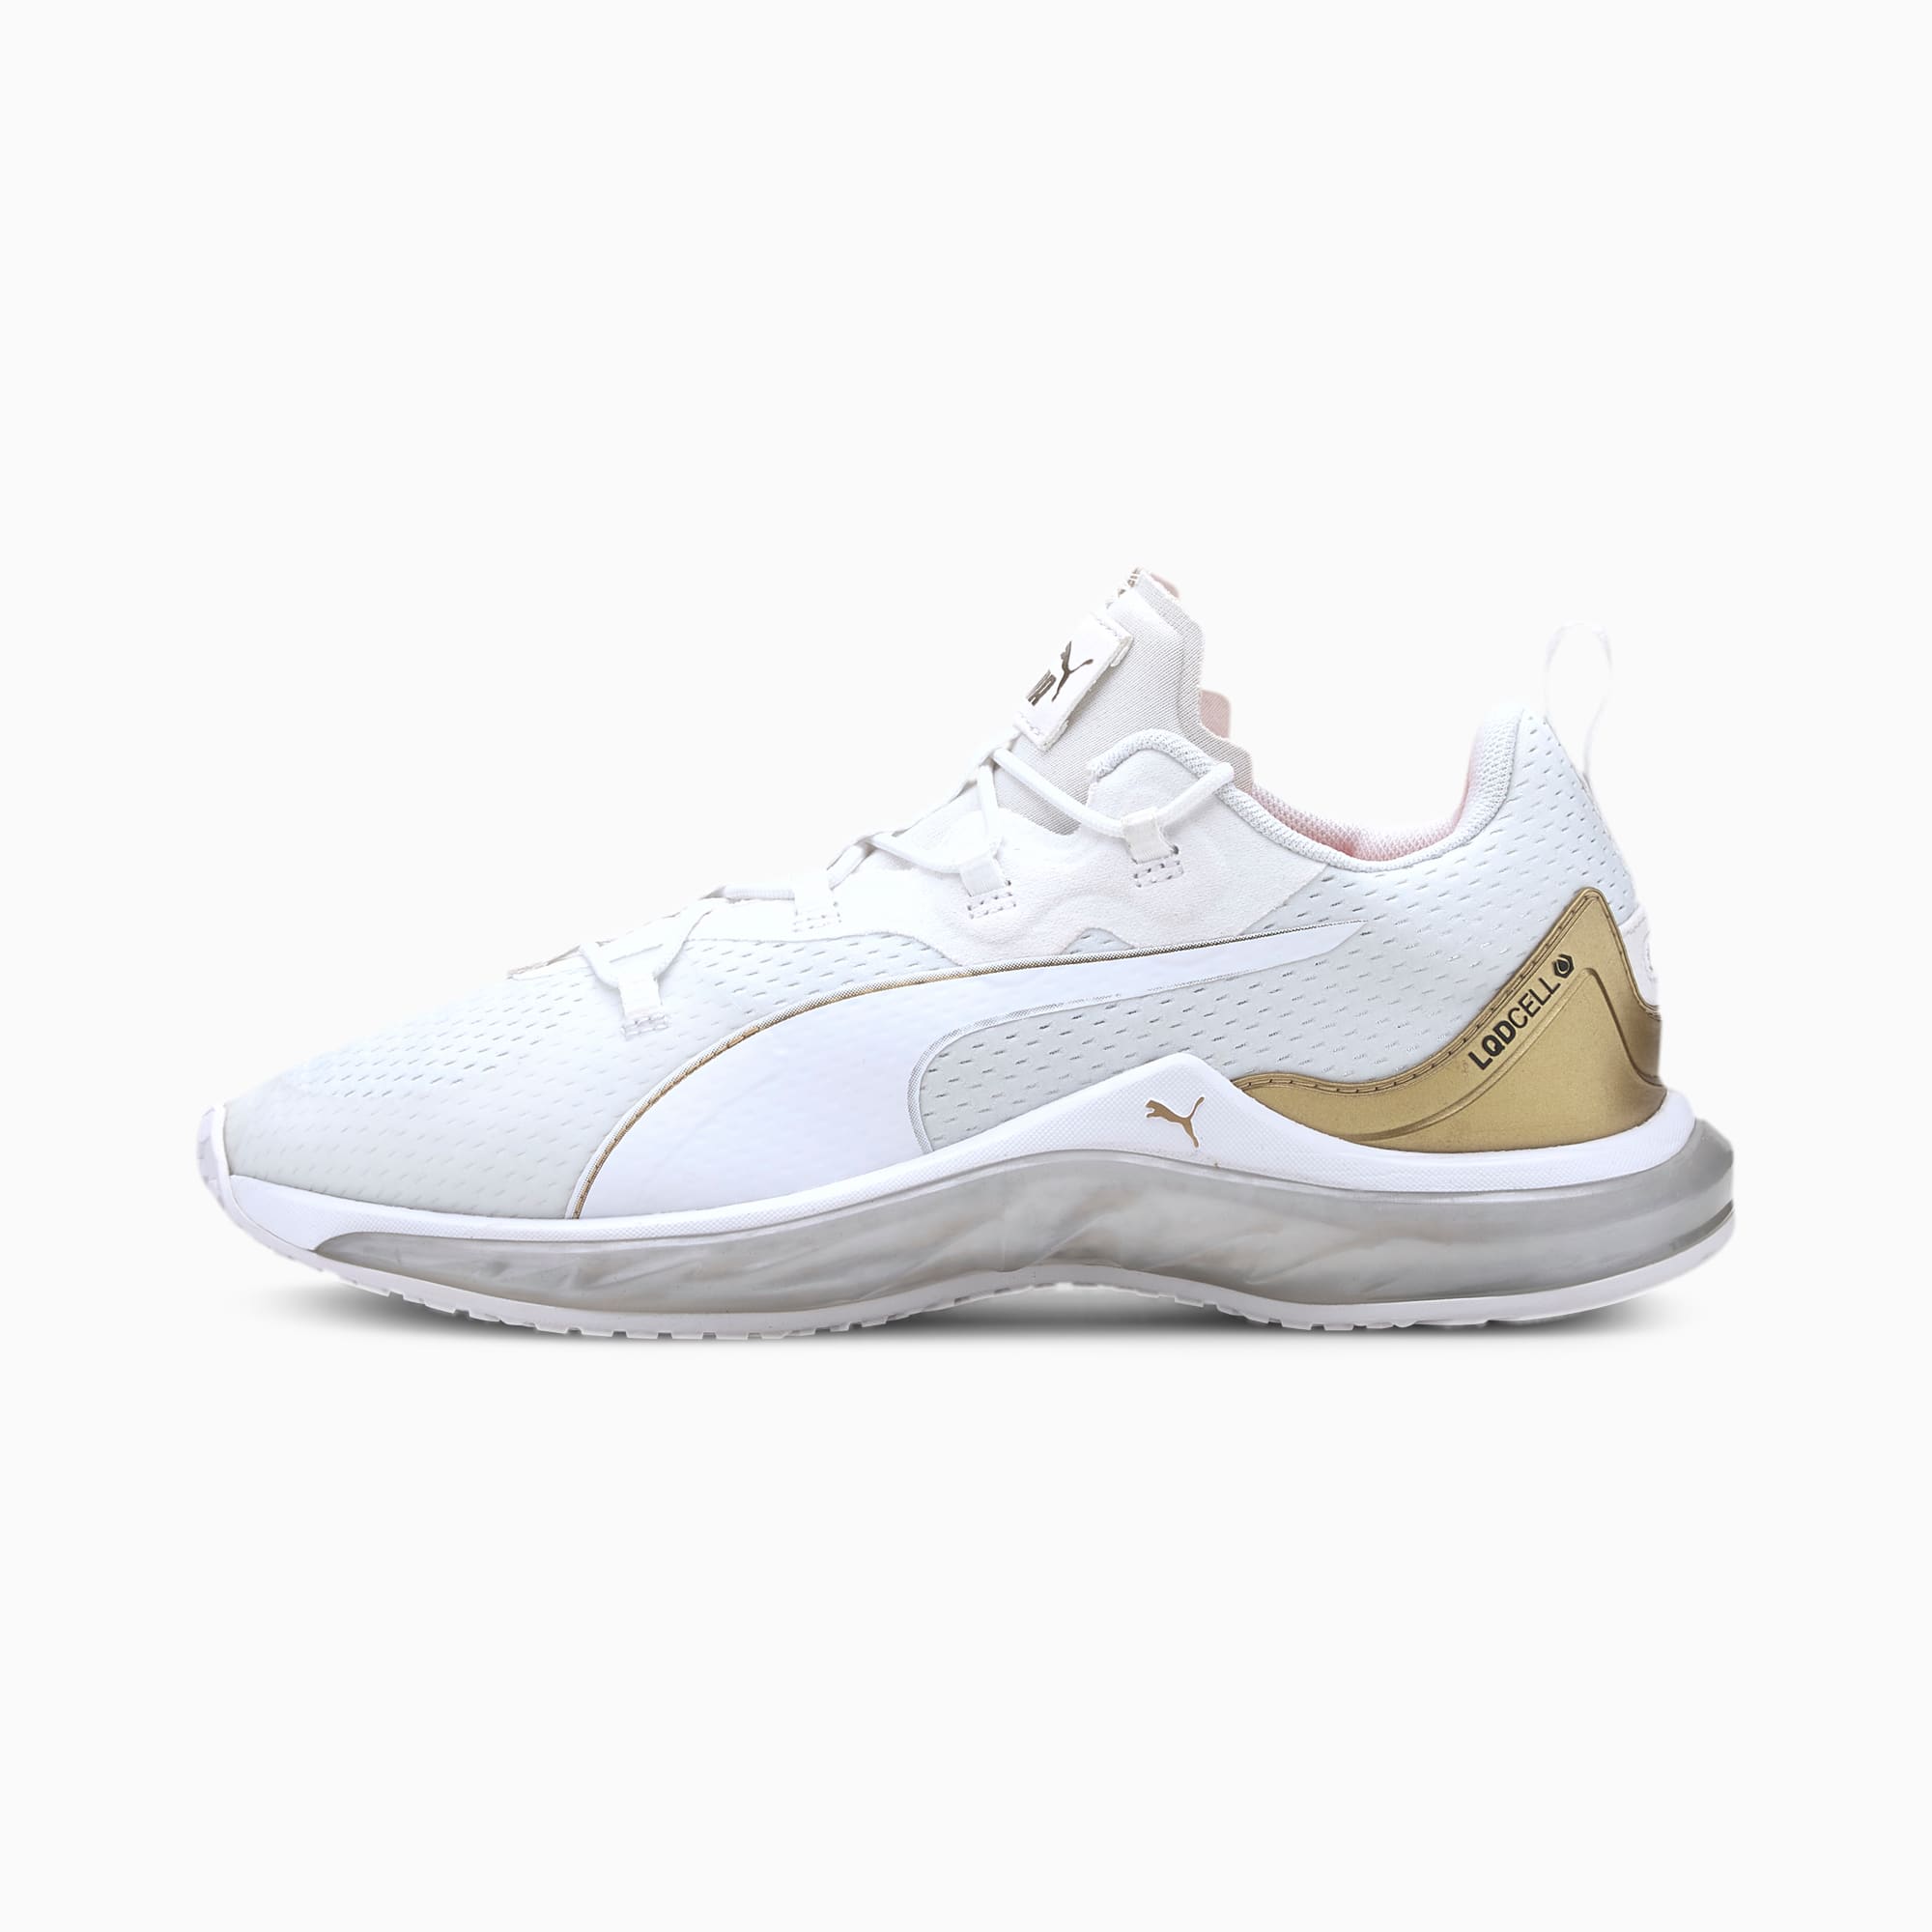 puma sneakers womens white and gold